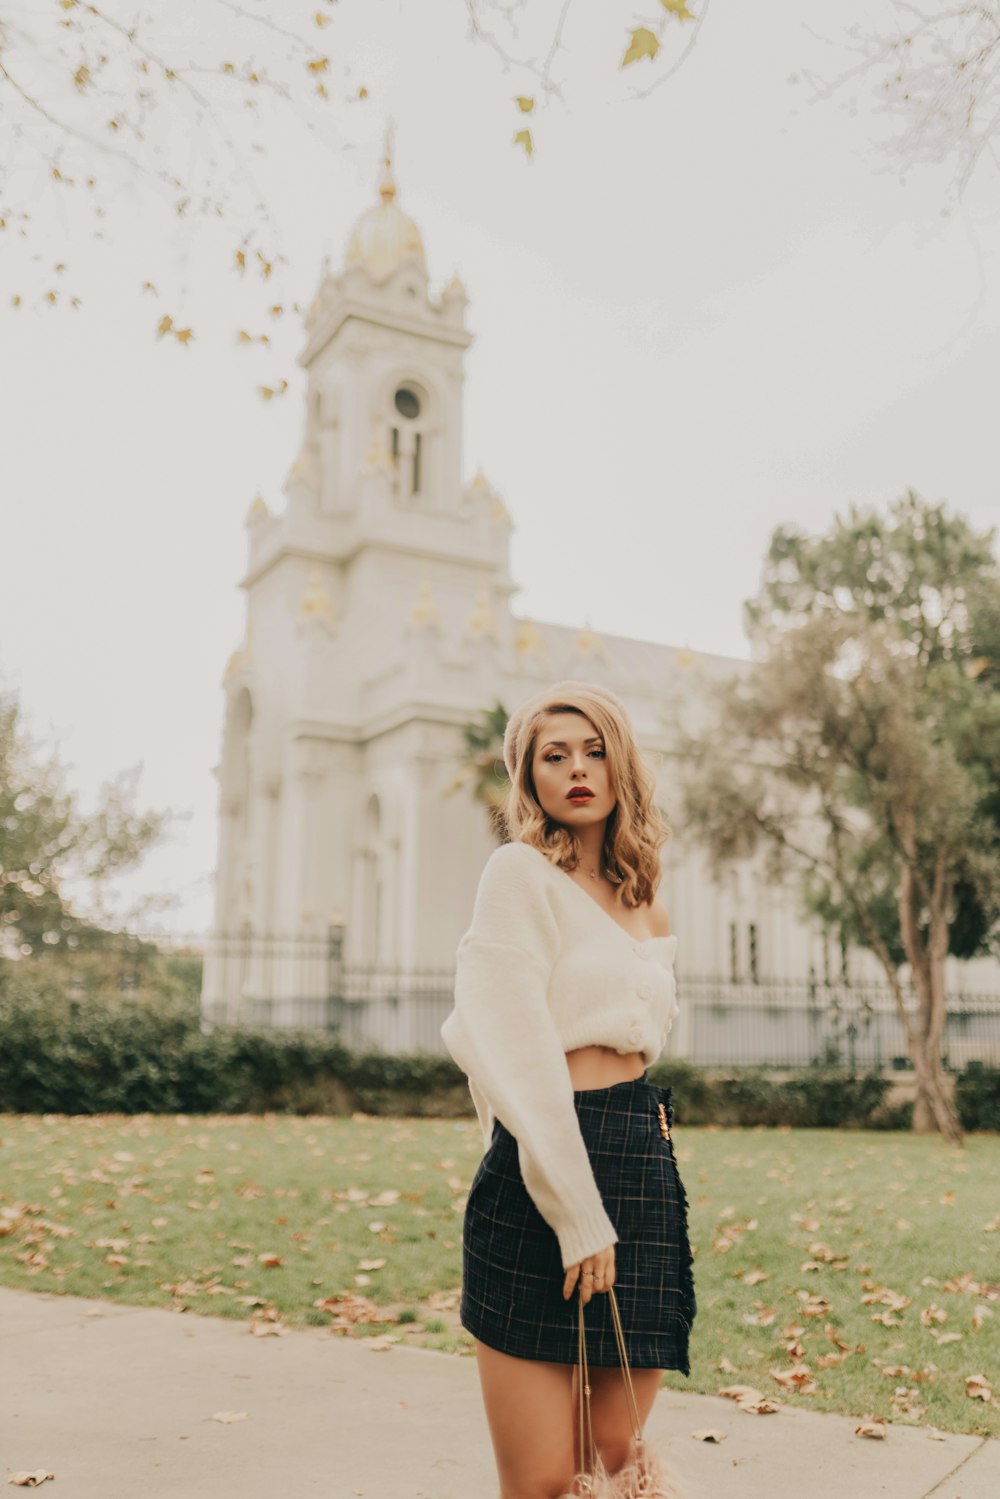 woman wearing white long-sleeved crop top standing near road viewing white church during daytime